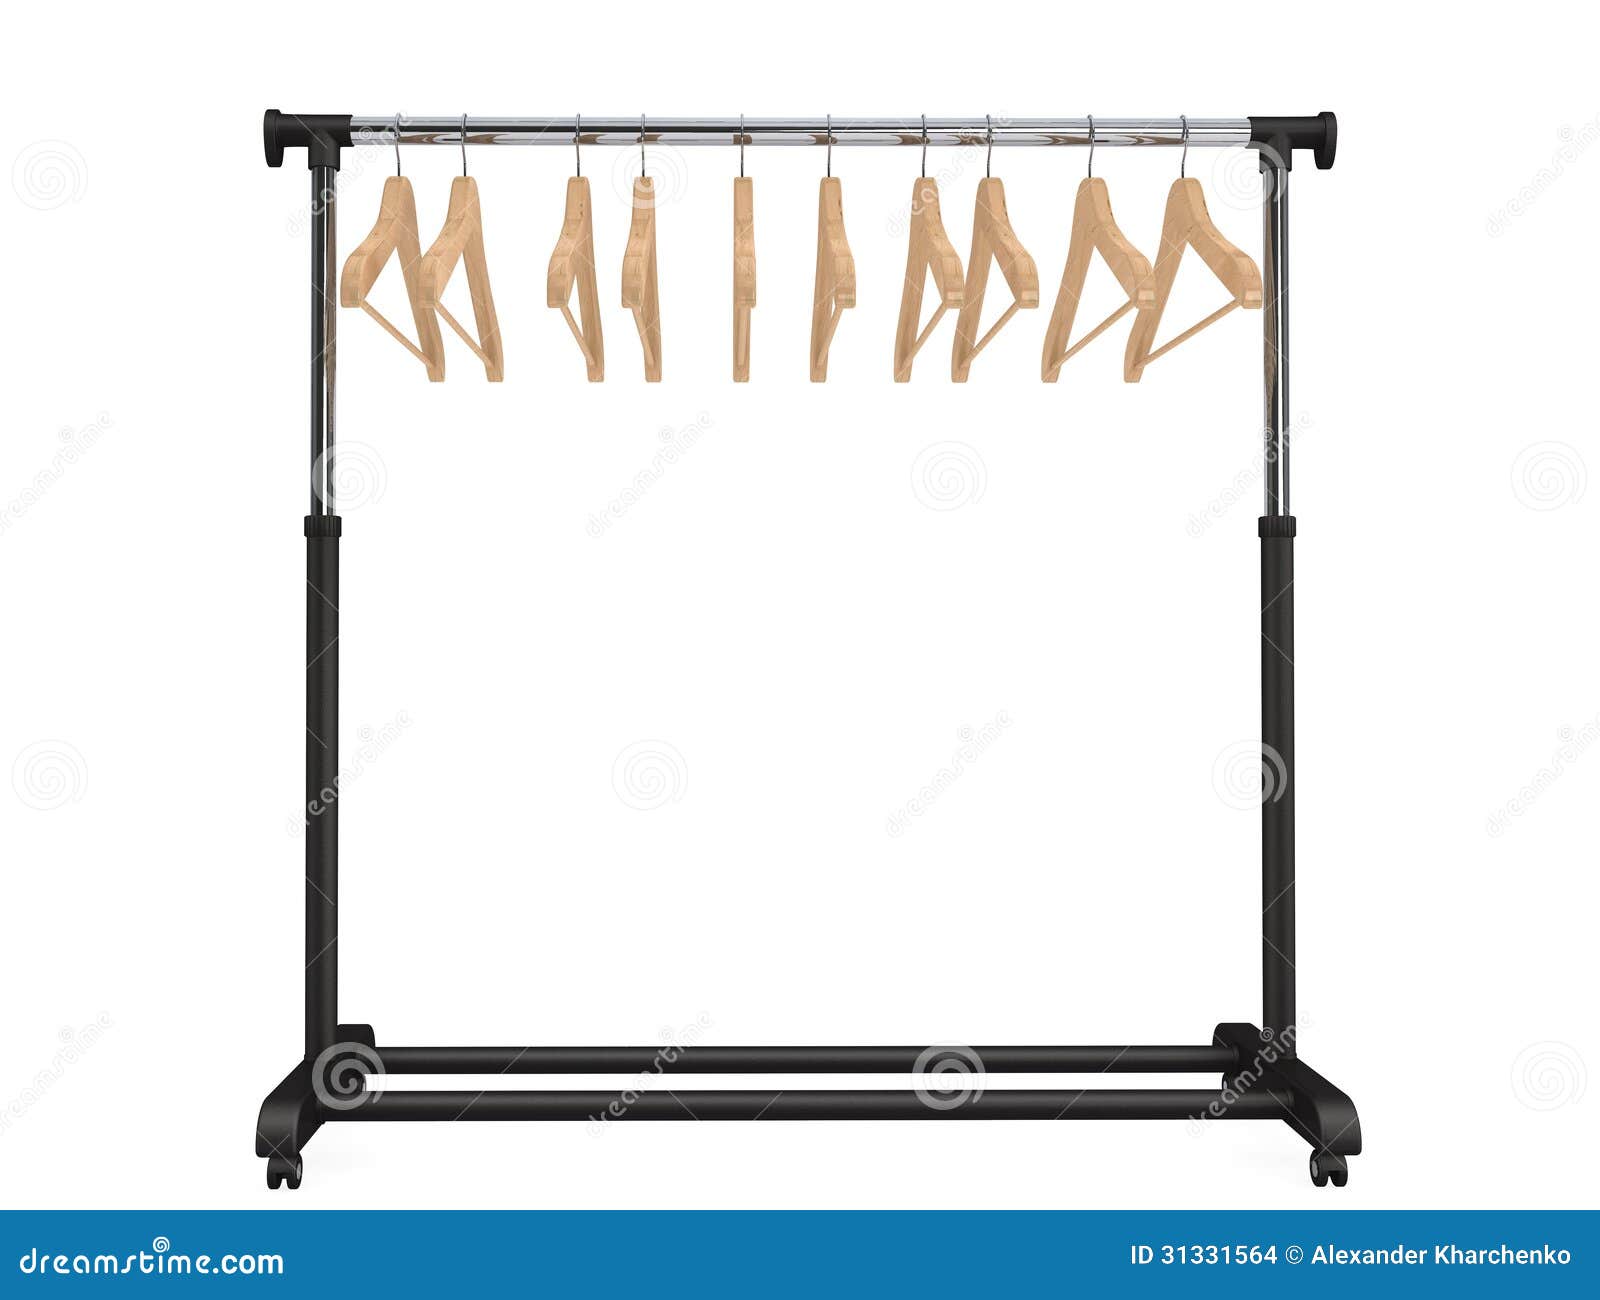 free clipart clothes rack - photo #38